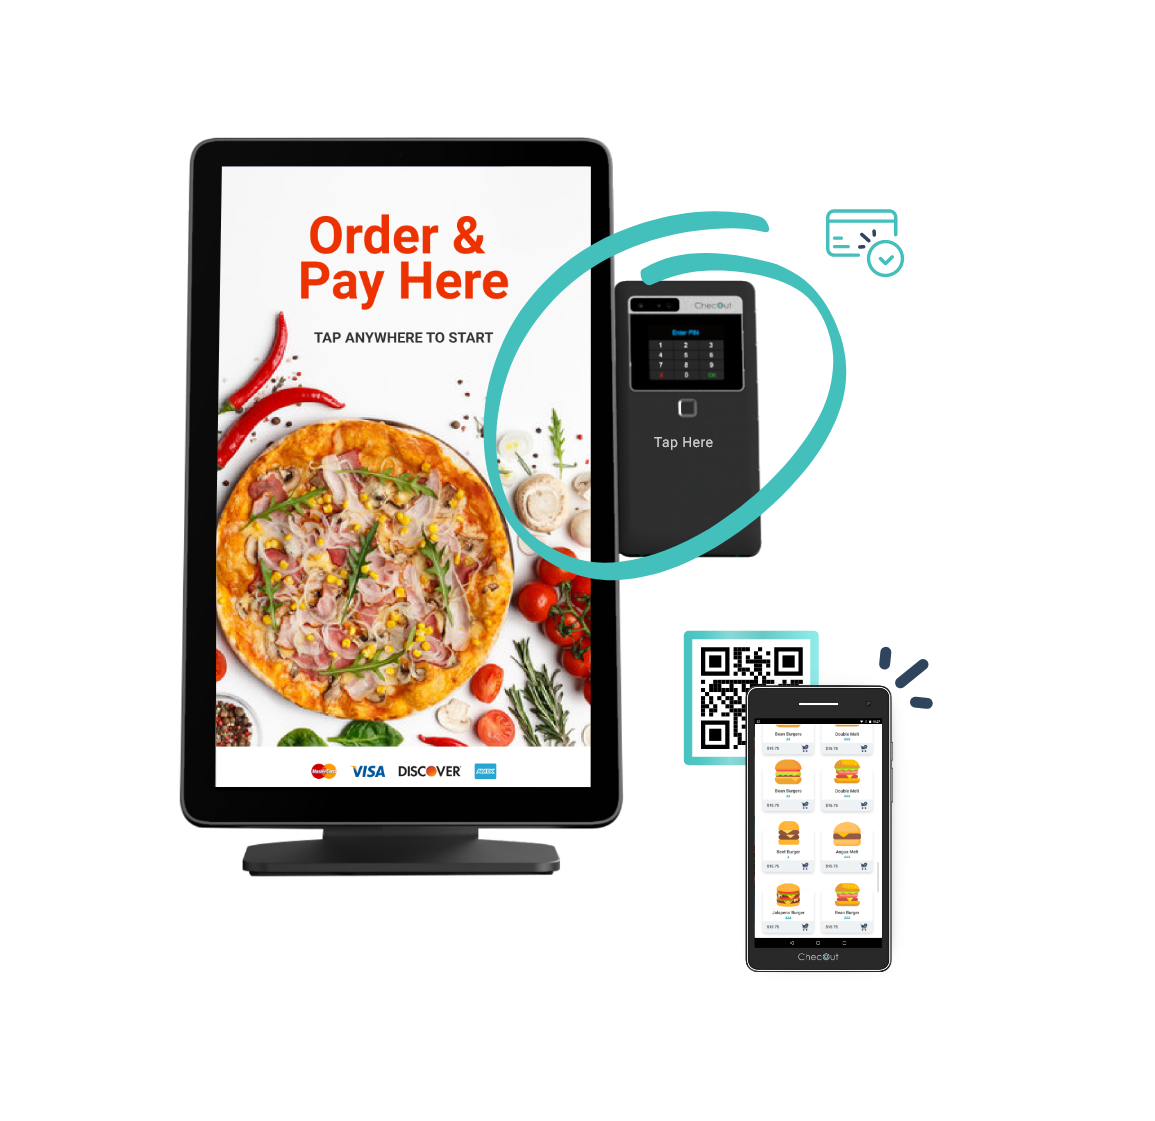 Order & Pay Here